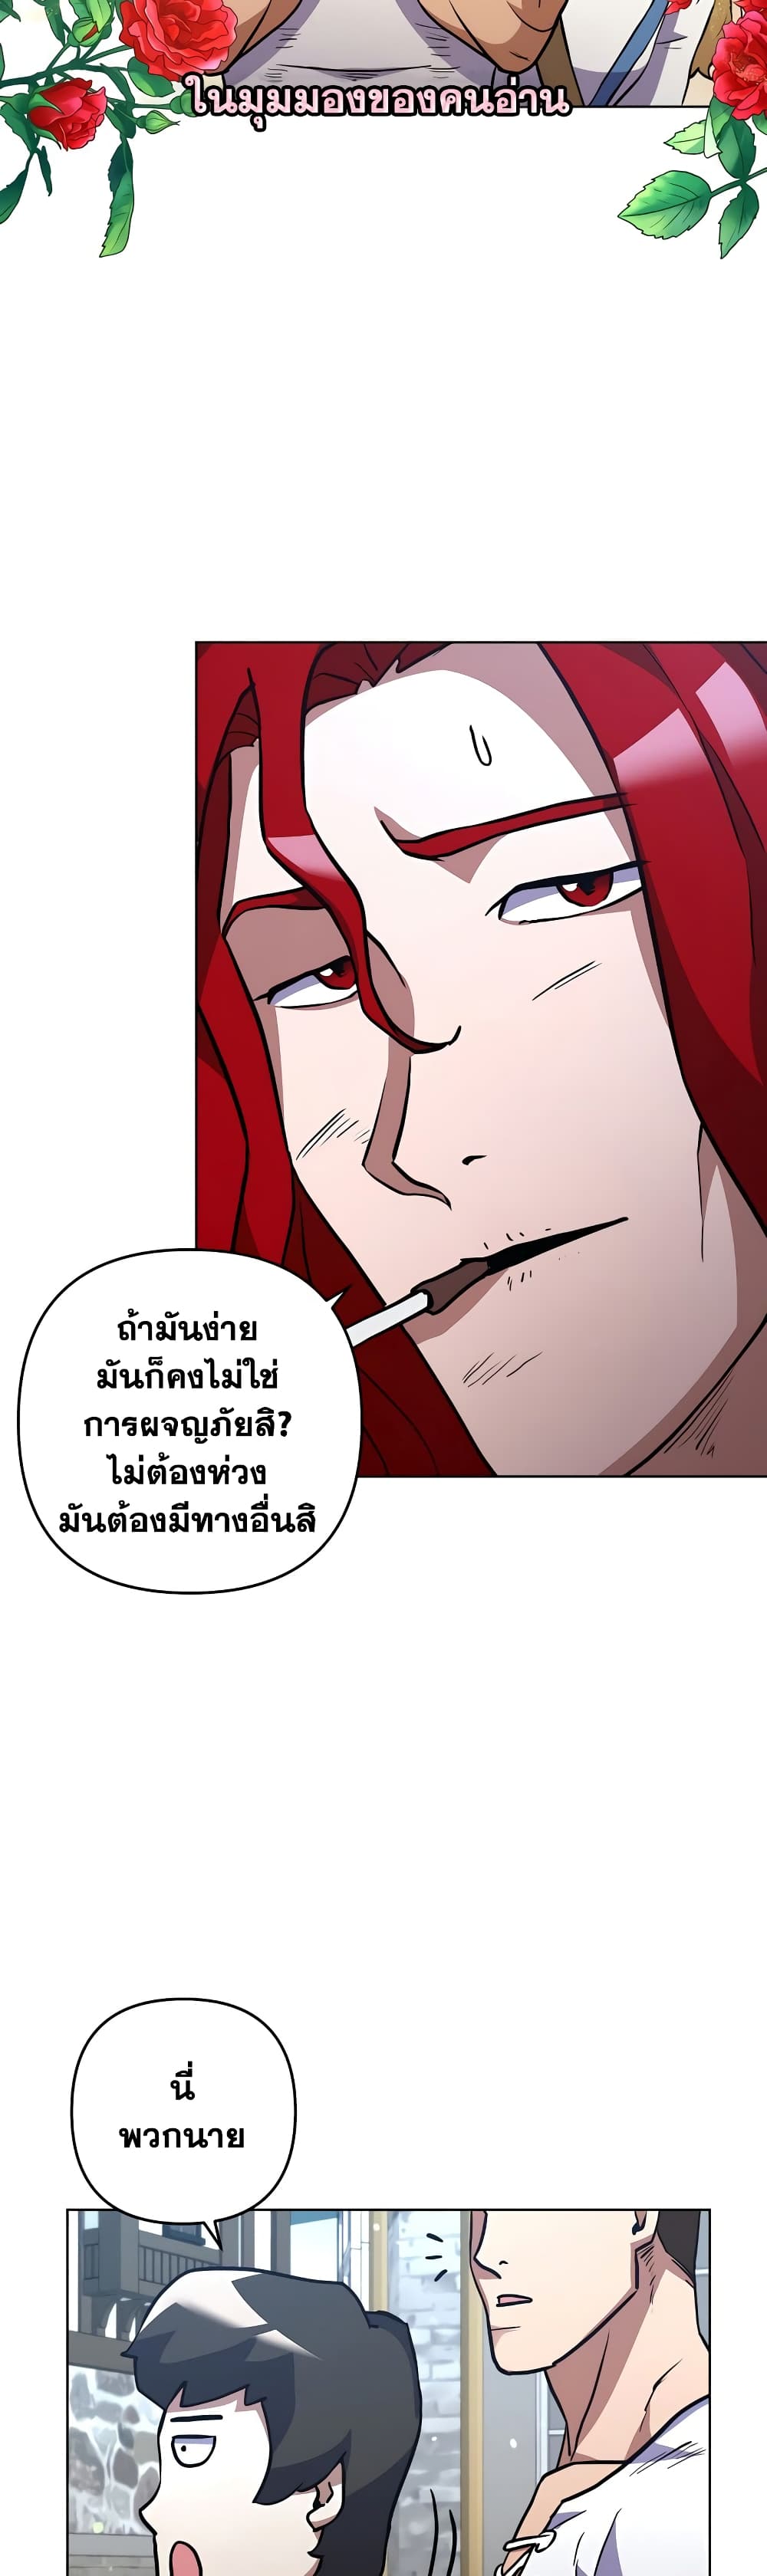 Surviving in an Action Manhwa 11-11